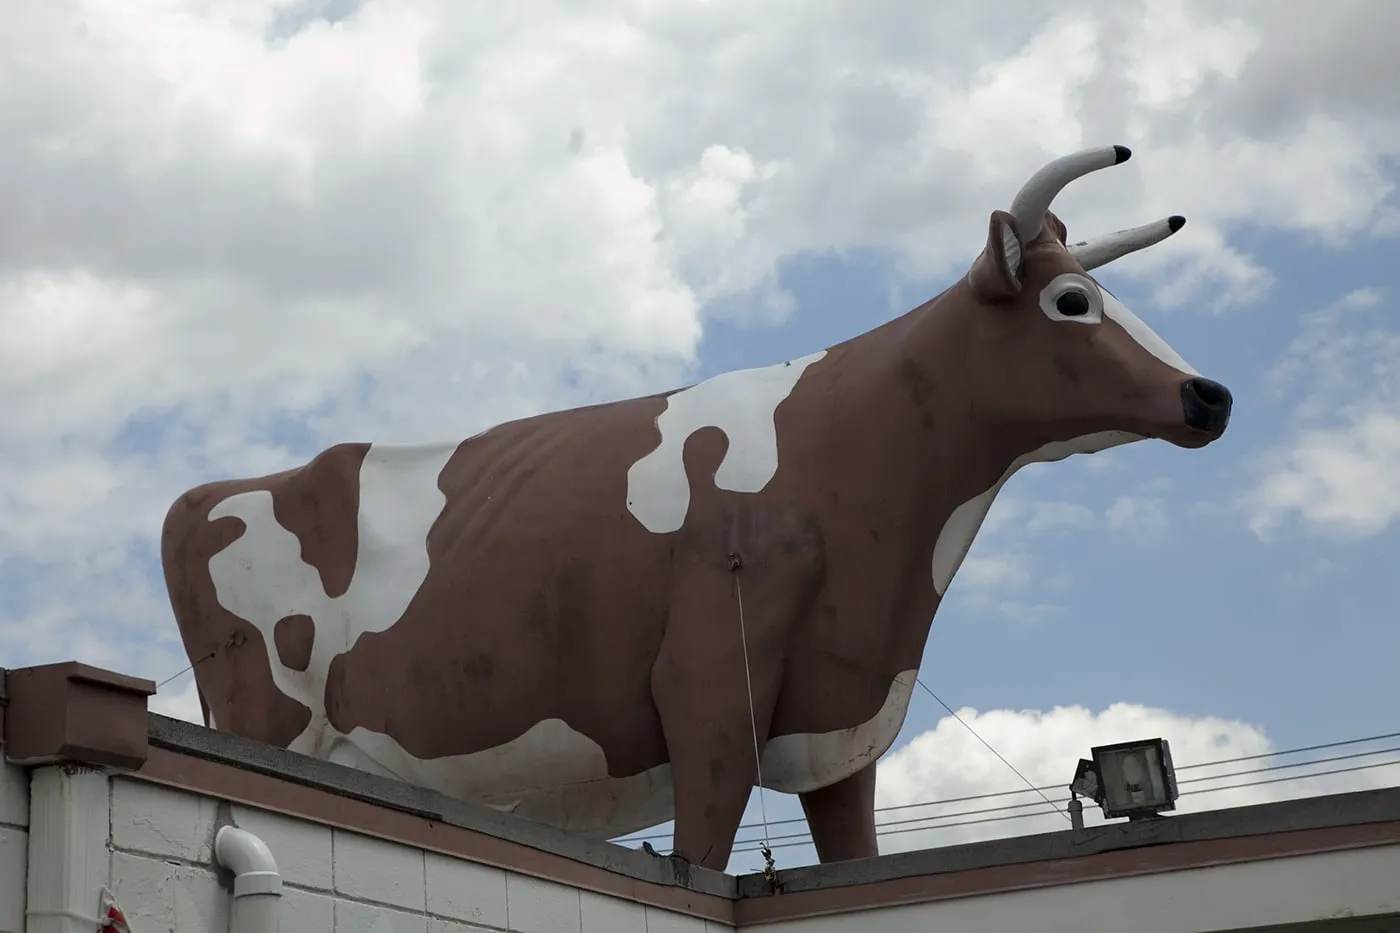 Convenience Store Cow on a Roof in Ypsilanti, Michigan